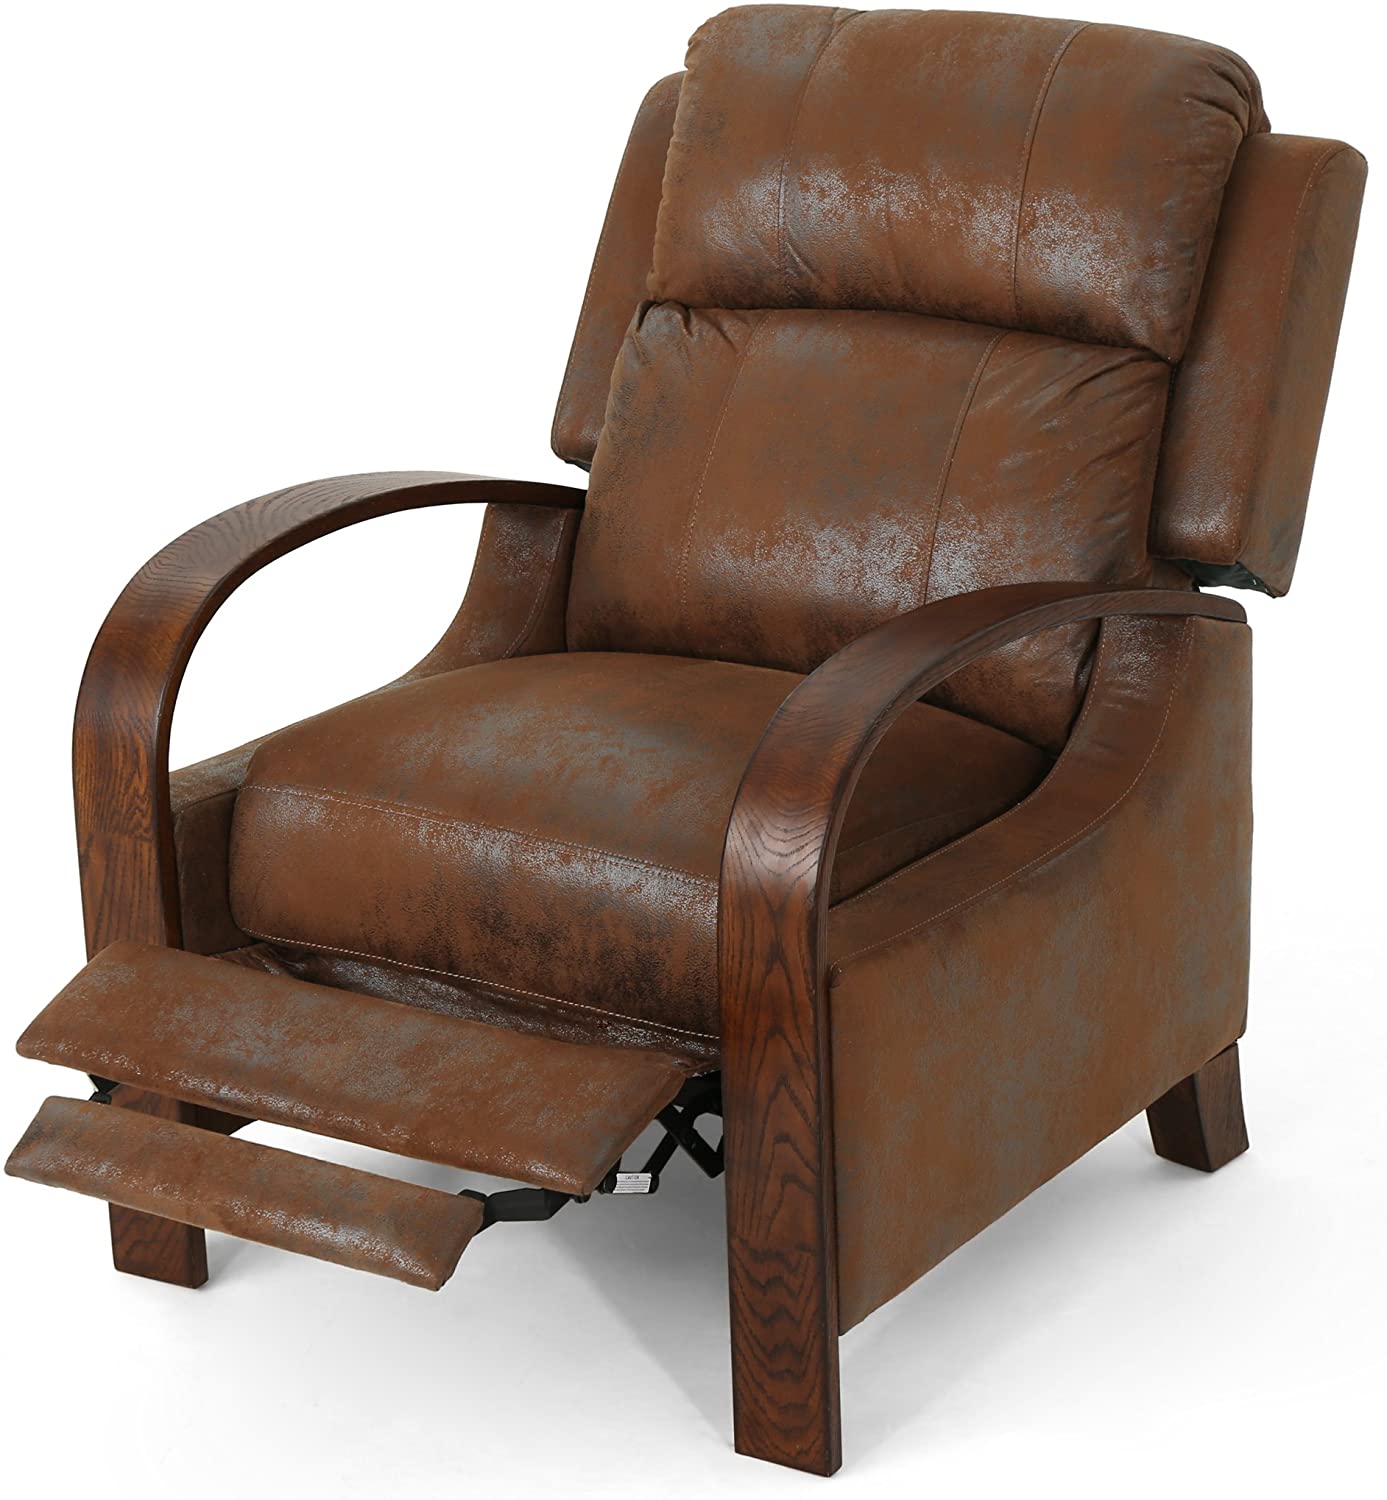 Christopher Knight Home Randall Recliner